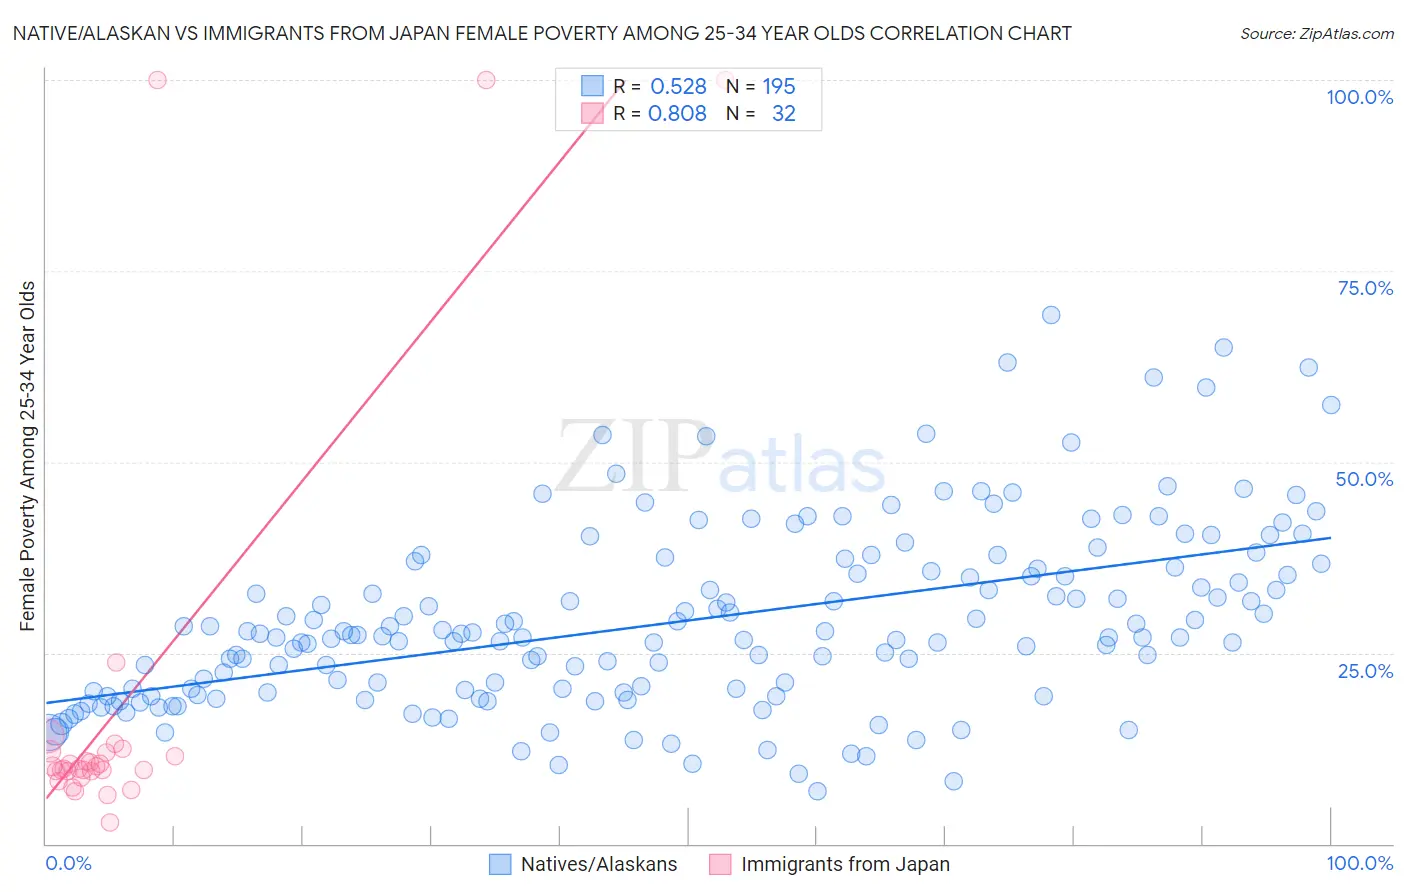 Native/Alaskan vs Immigrants from Japan Female Poverty Among 25-34 Year Olds